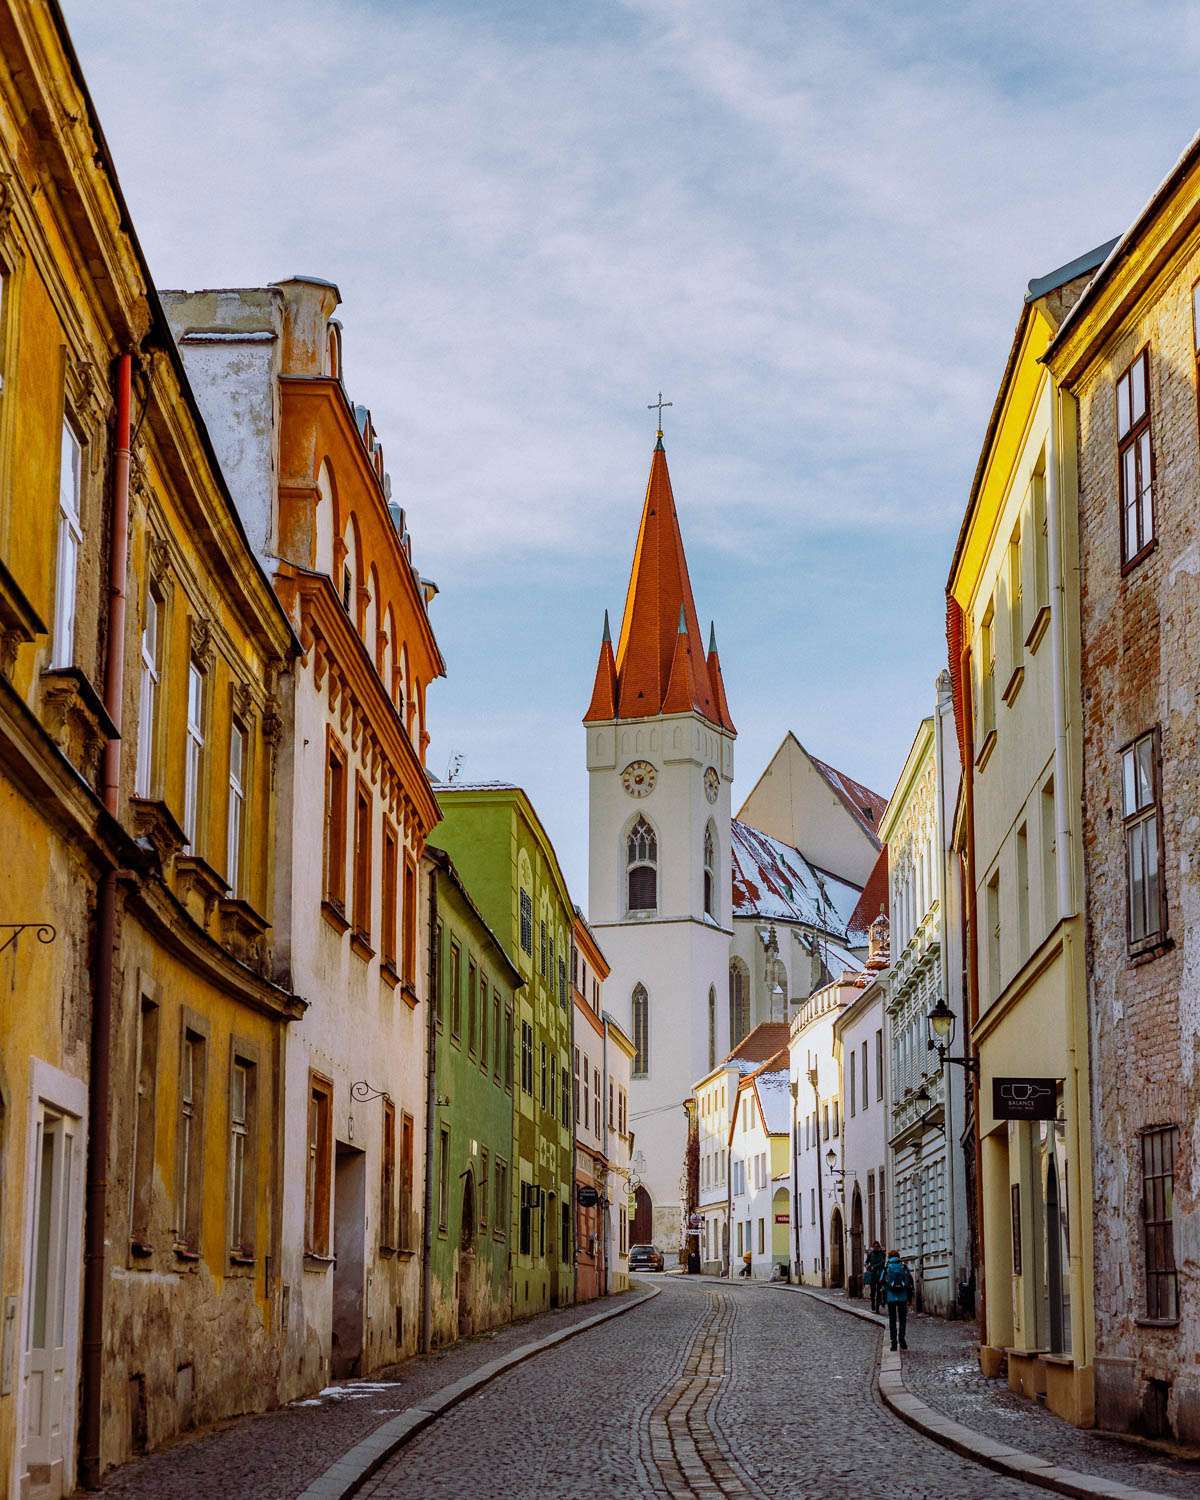 Rachel Off Duty: Amazing Places to Visit in the Czech Republic - Znojmo